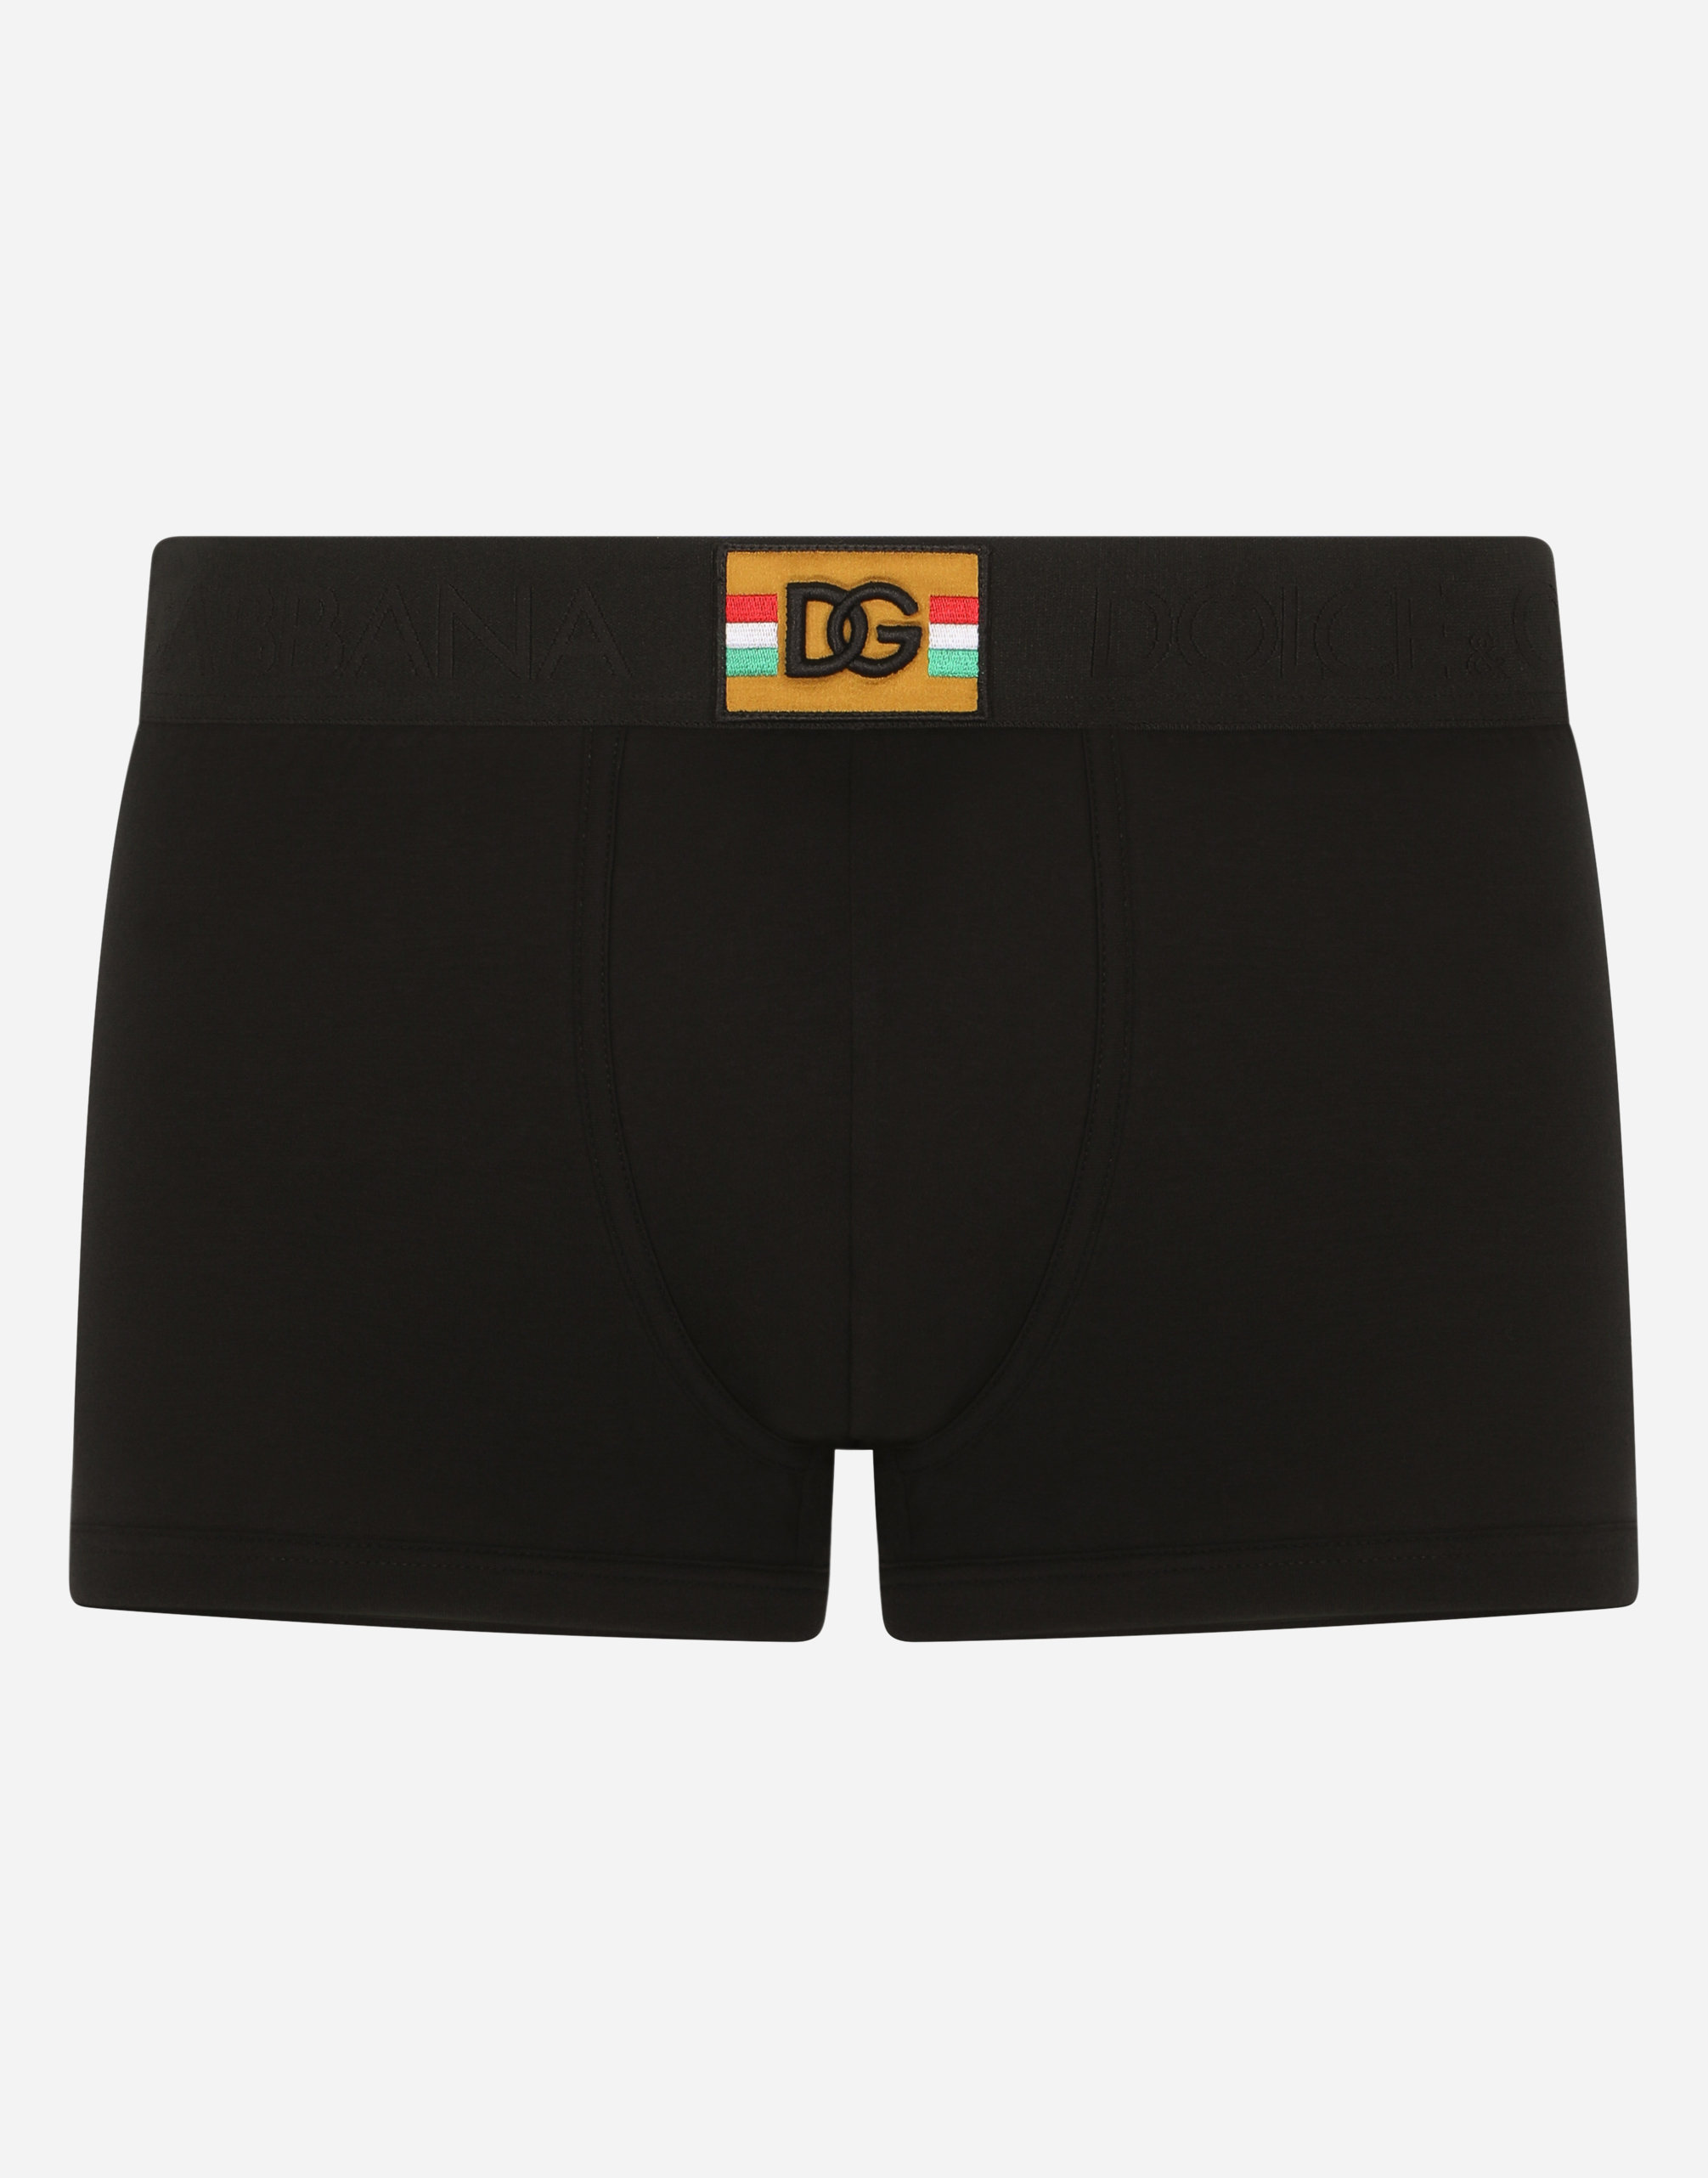 Two-way-stretch jersey boxers with DG patch in Black